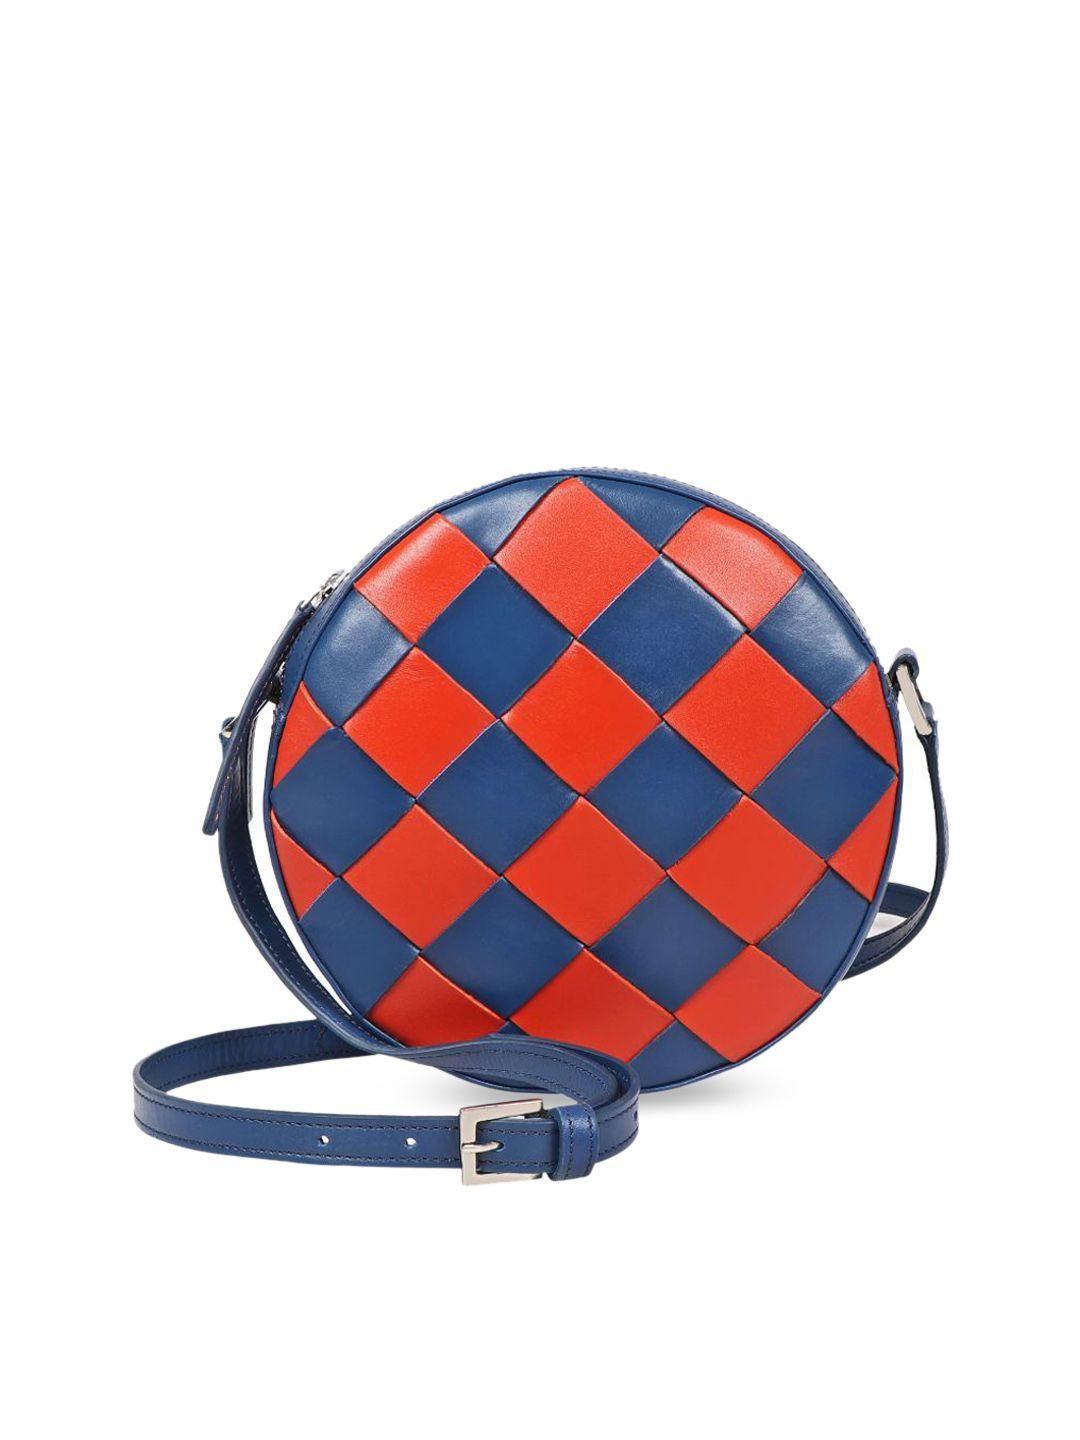 hidesign blue geometric printed leather structured sling bag with tasselled